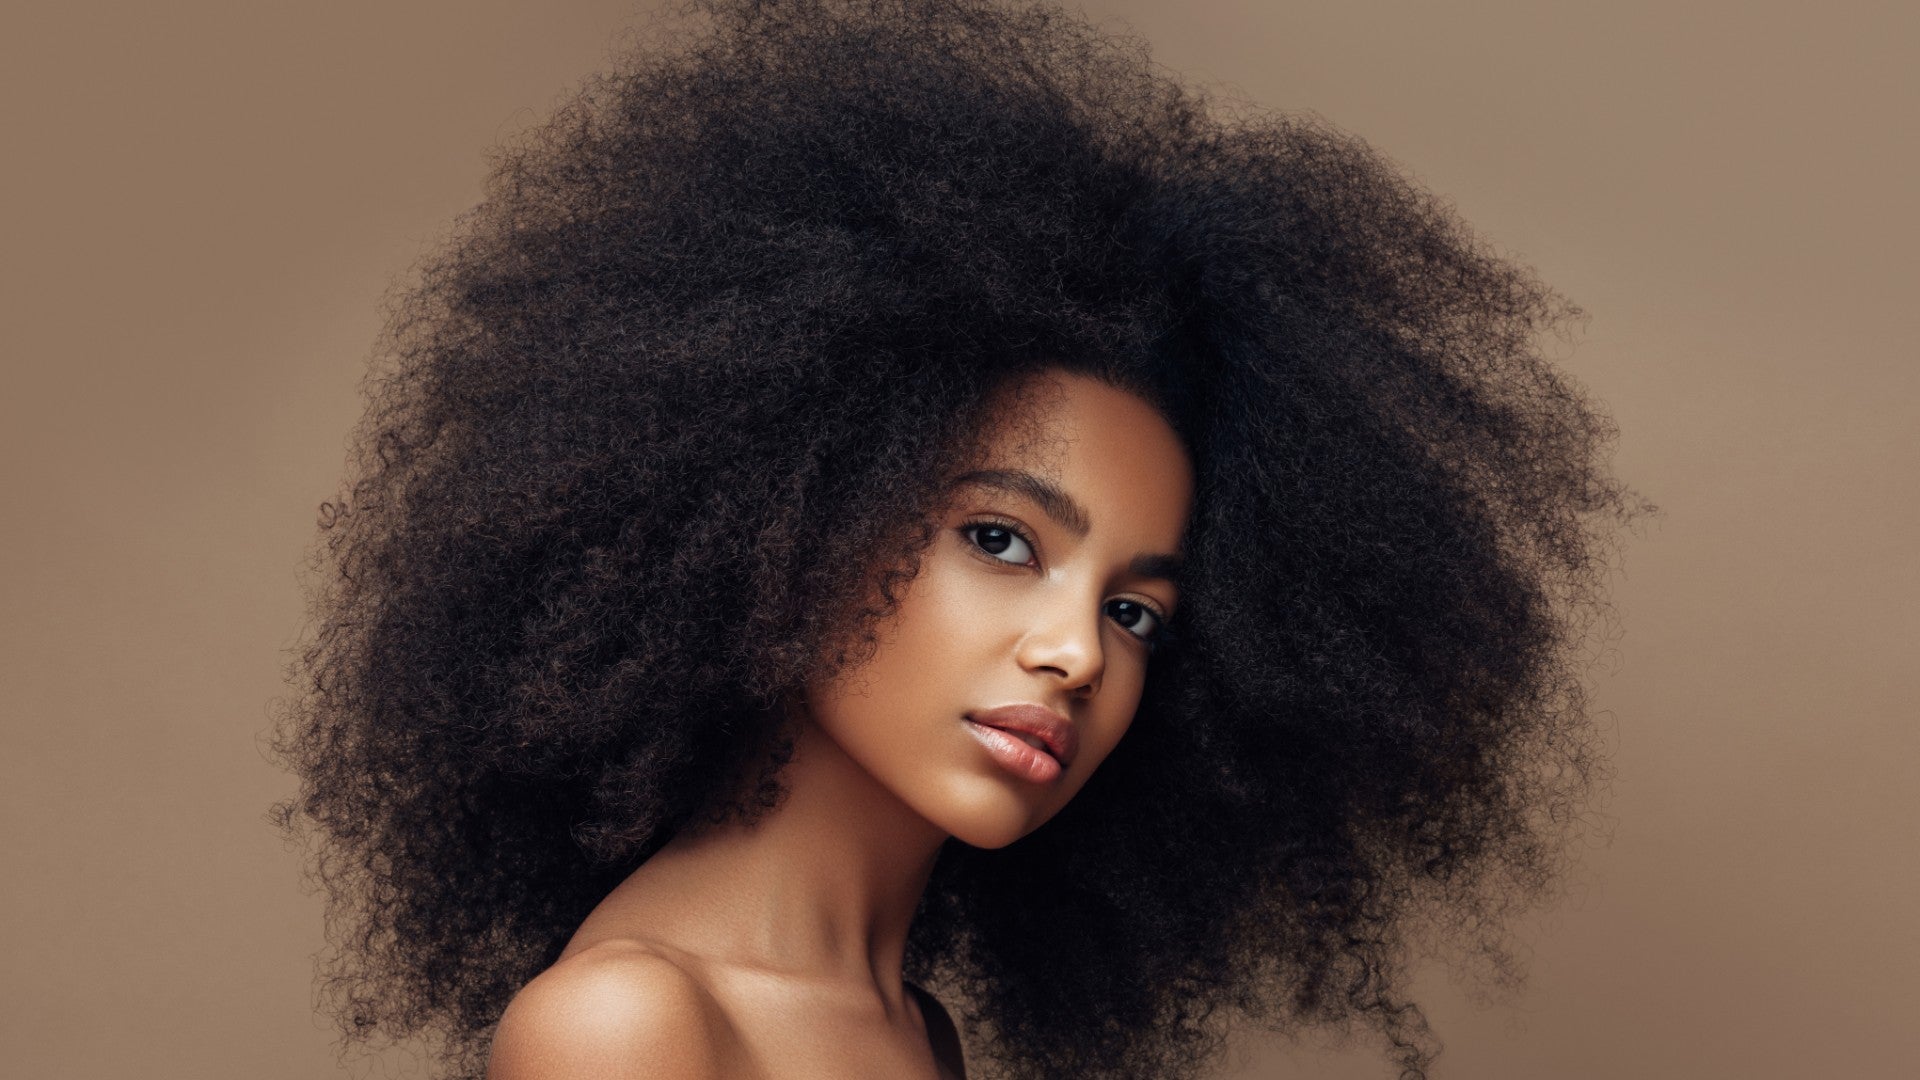 An Aveda Salon Charged A Black Woman Extra For Having Textured Hair, We  Need Answers - Essence